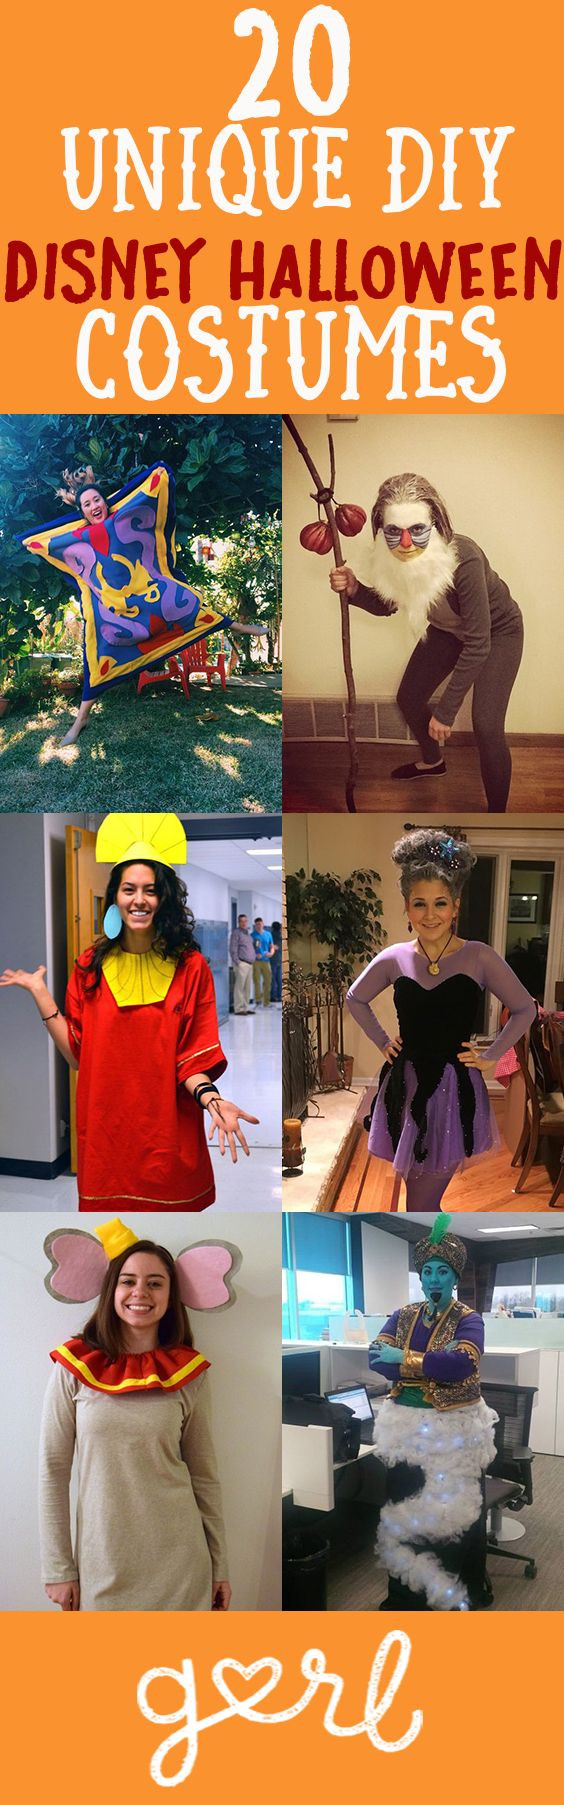 DIY Disney Character Costume
 Best 25 Character costumes ideas on Pinterest